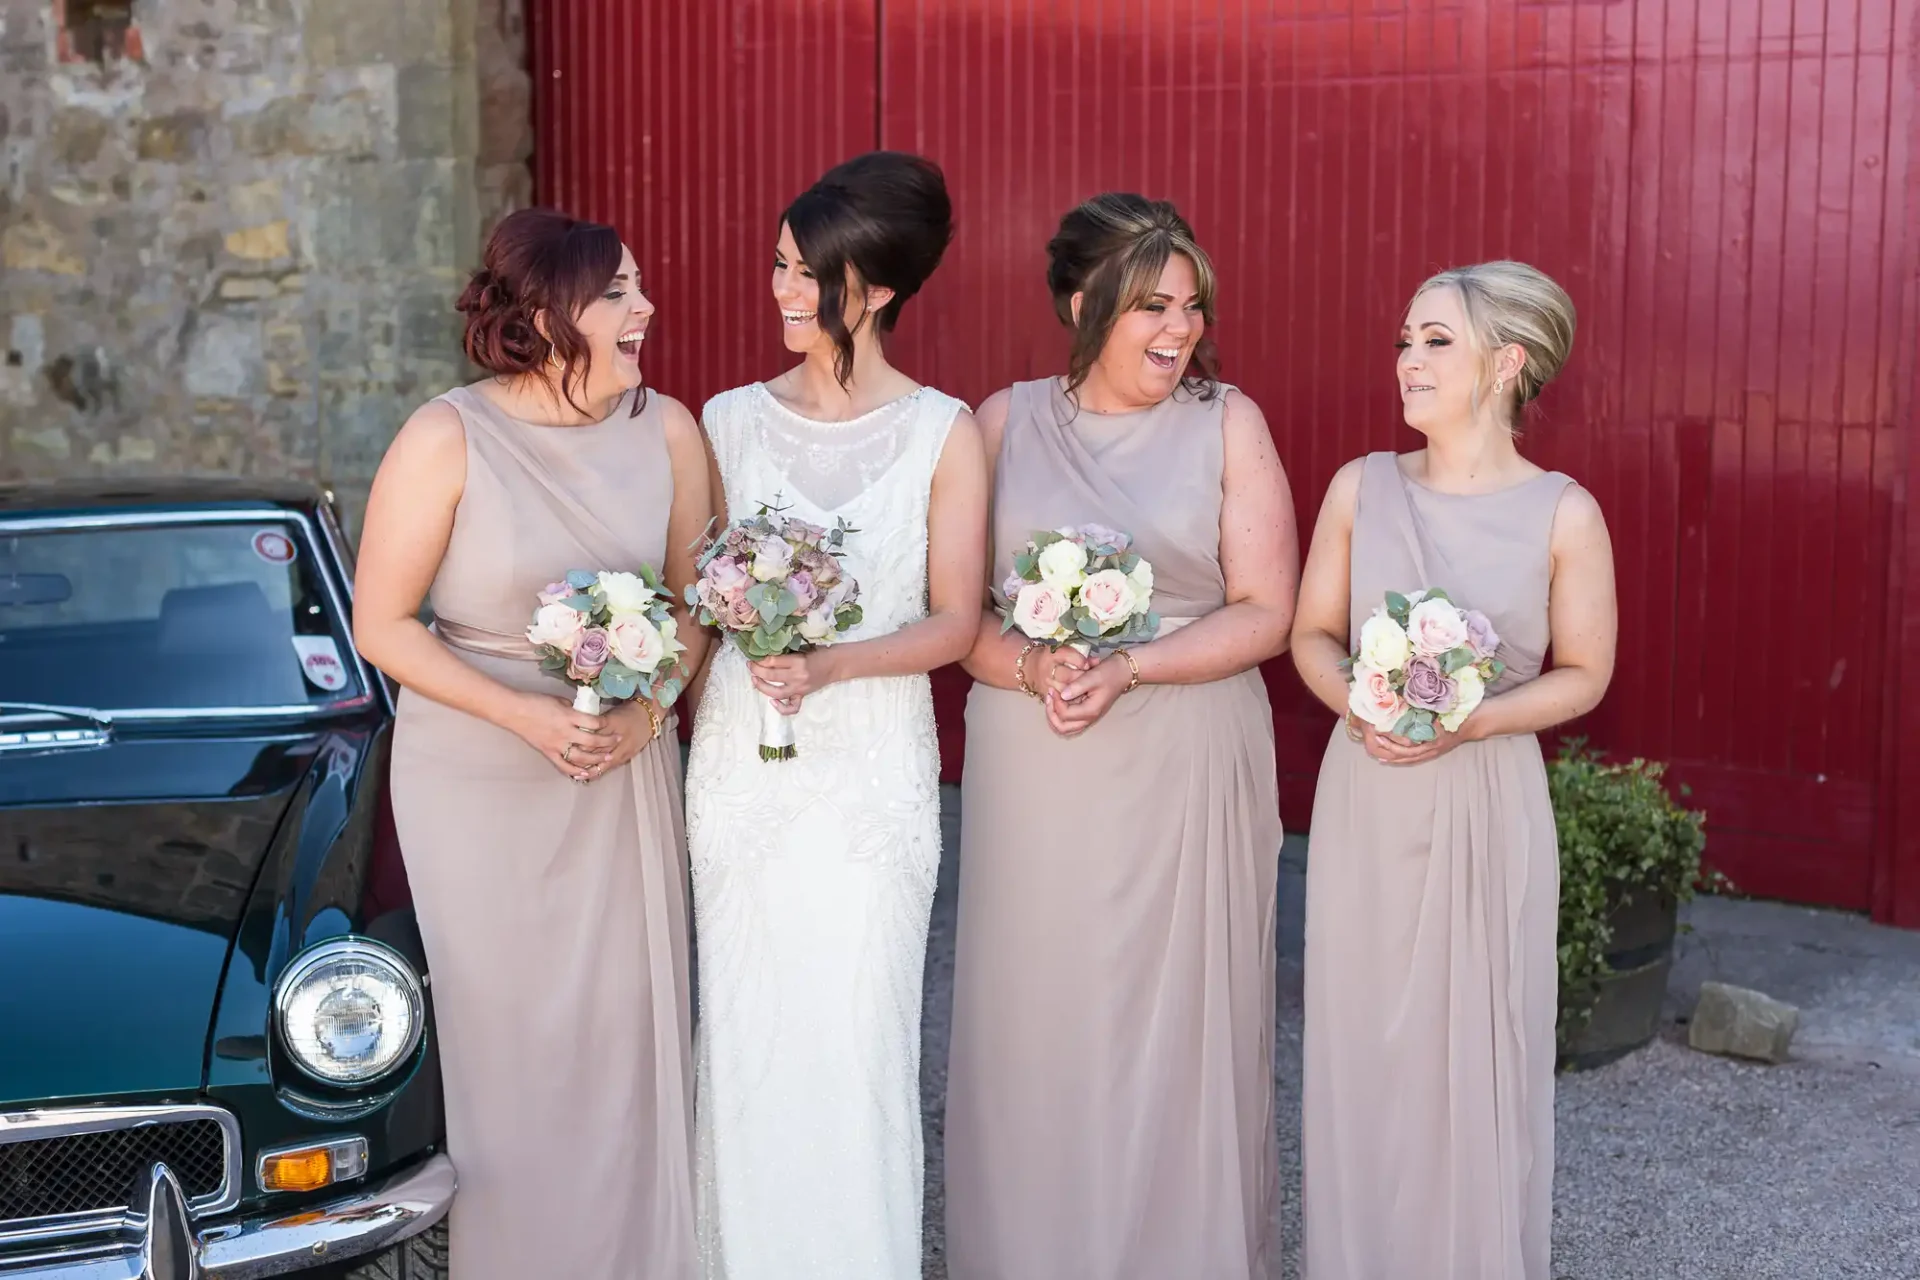 A bride and three bridesmaids in beige dresses laughing together in front of a vintage car and a red door.